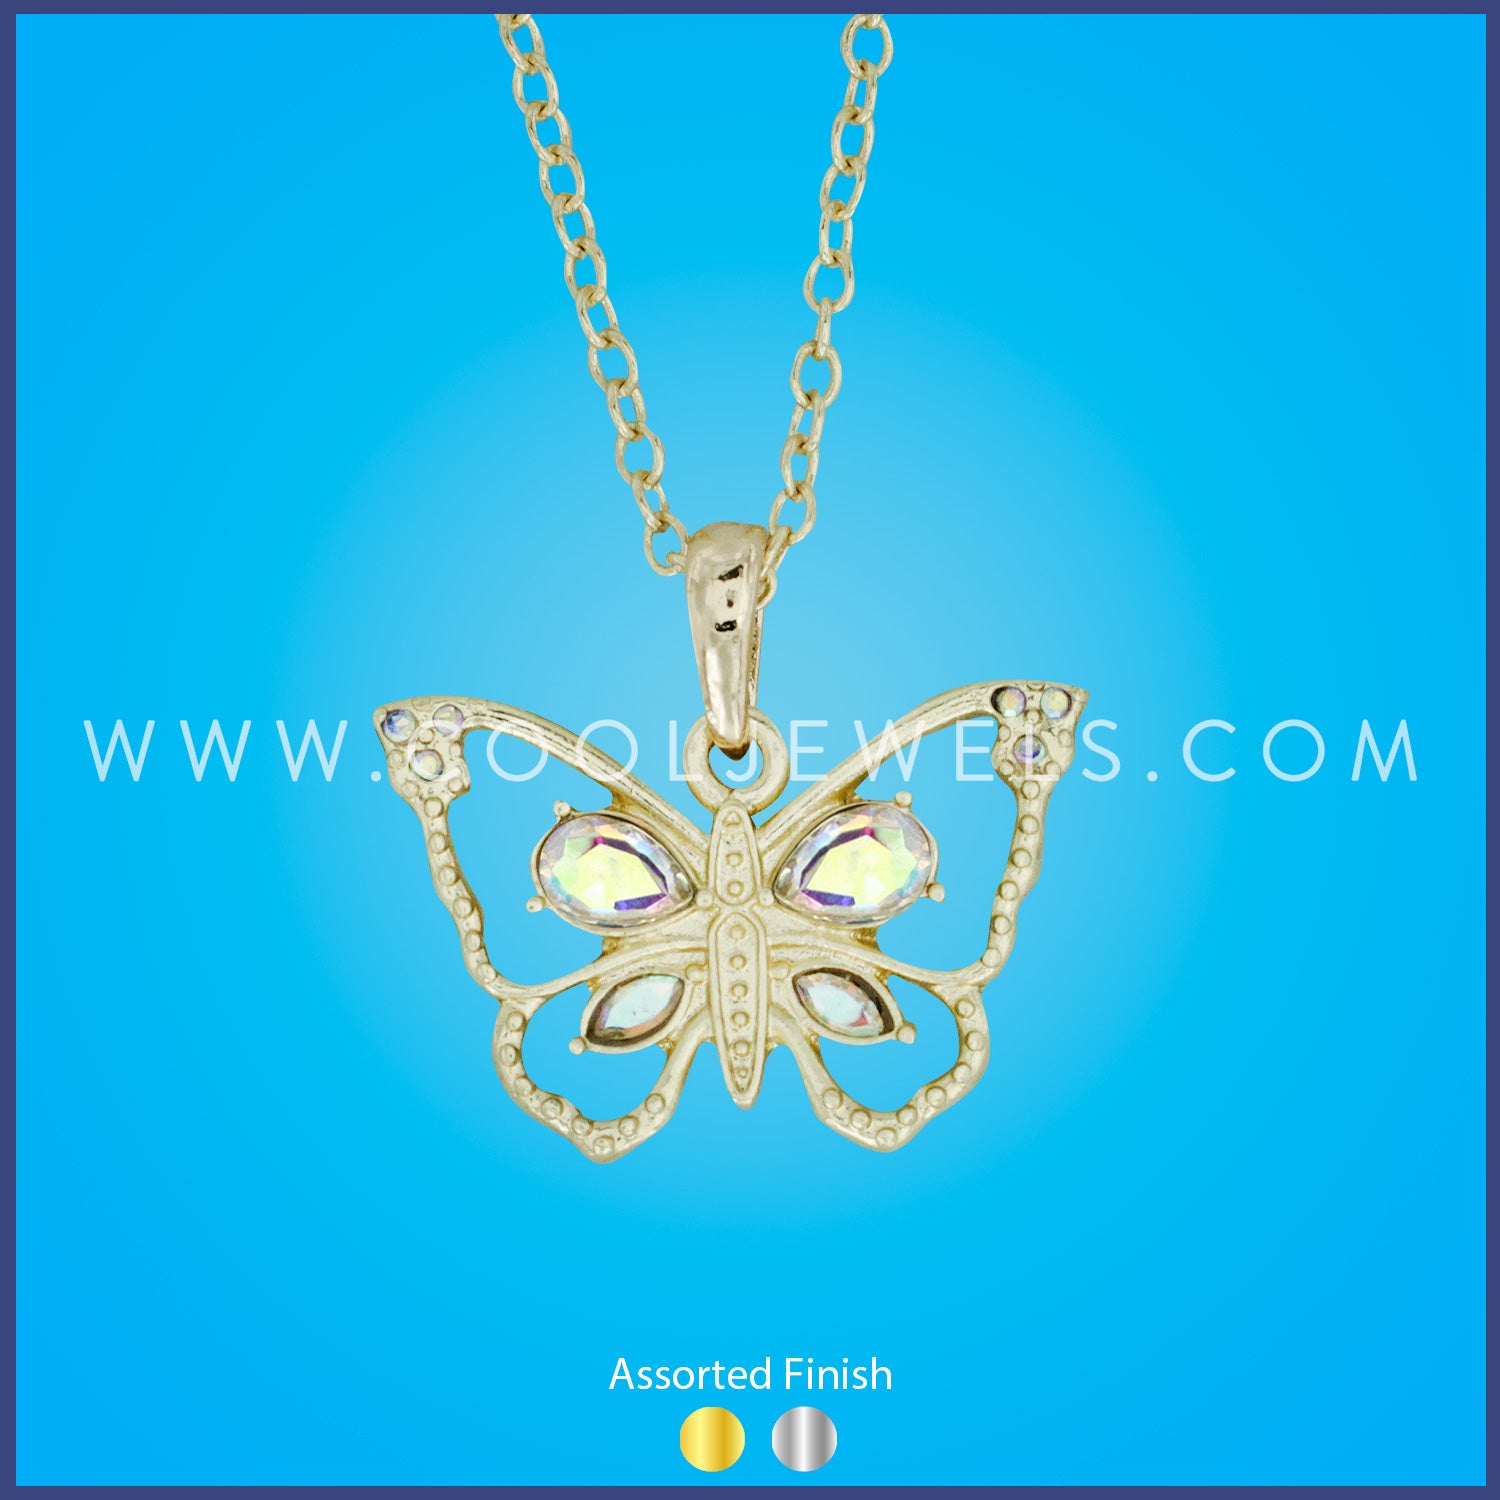 LINK CHAIN NECKLACE WITH RHINESTONE BUTTERFLY PENDANT - ASSORTED FINISH